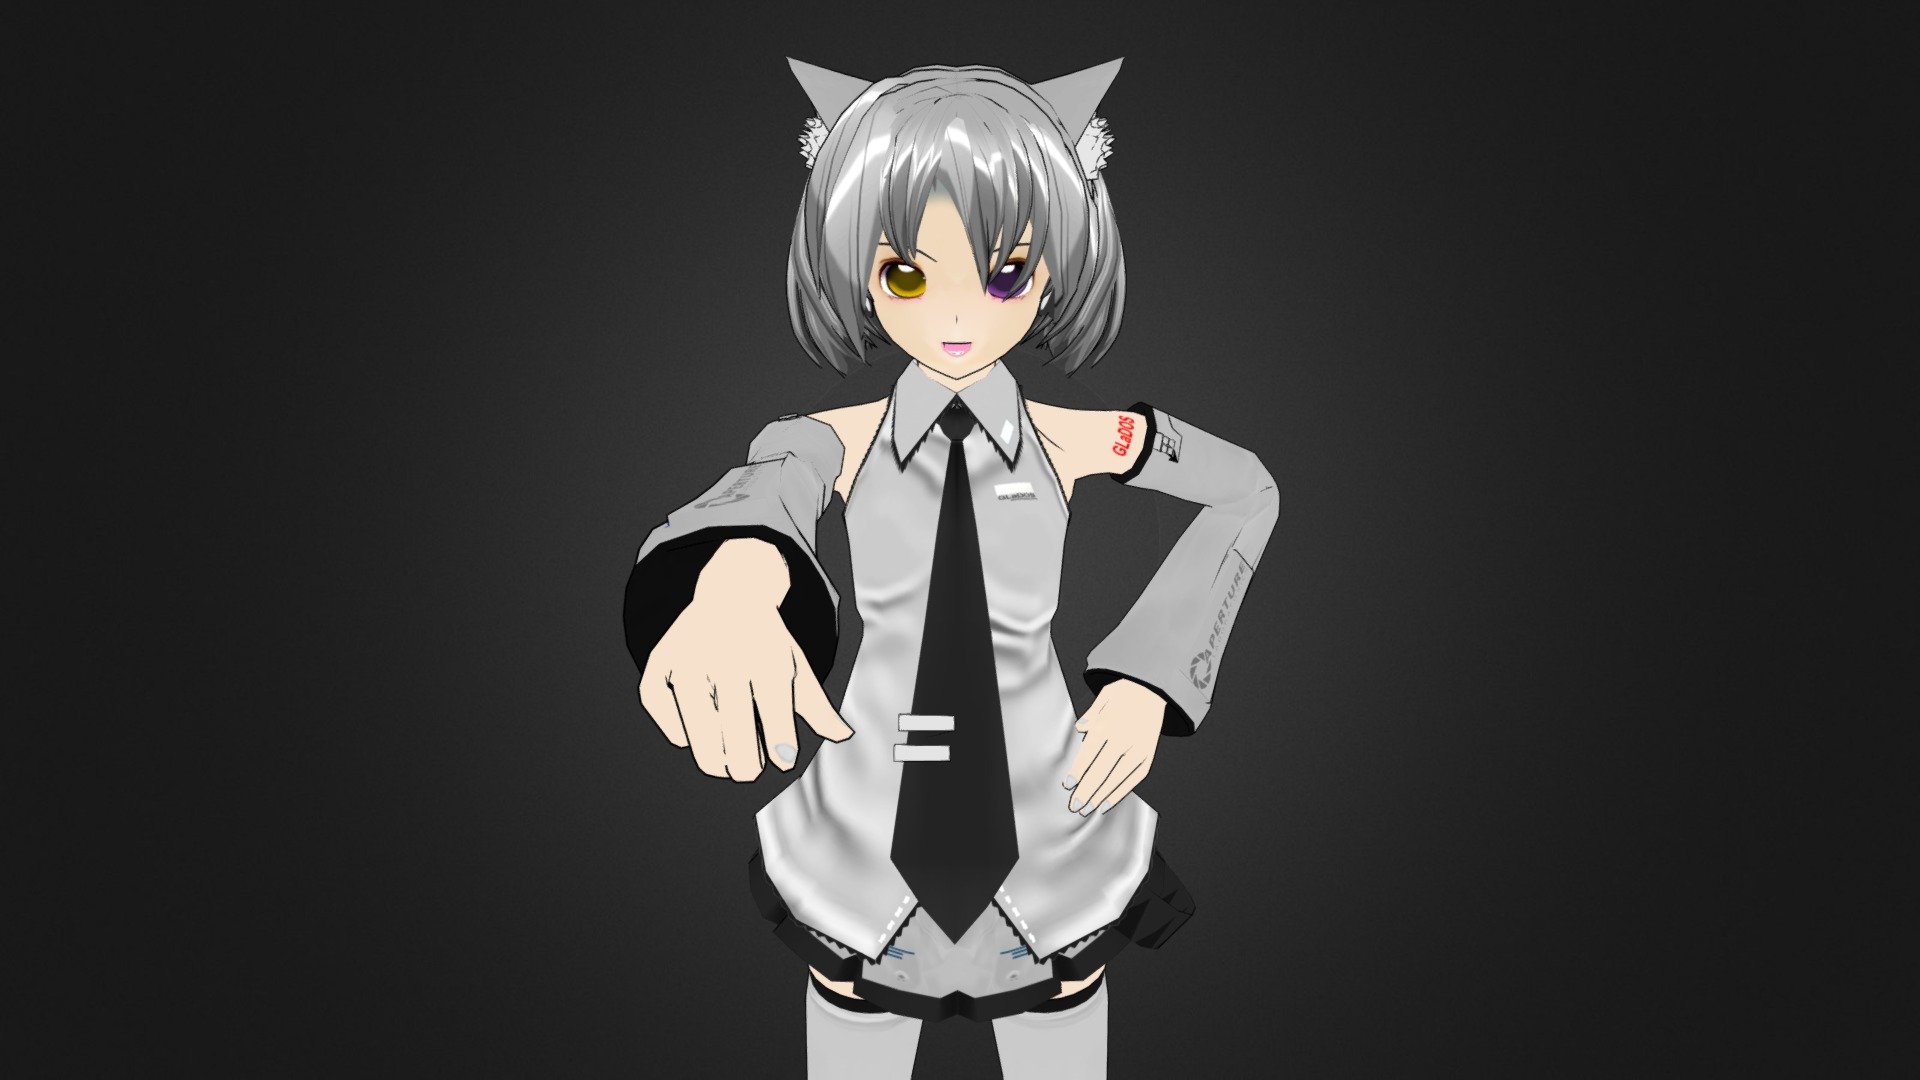 GLaDOS in real portal game is too robotic. How about we make it into more cute moe looking anime cat girl?  - Nekomimi GLaDOS - 3D model by xenoaisam 3d model